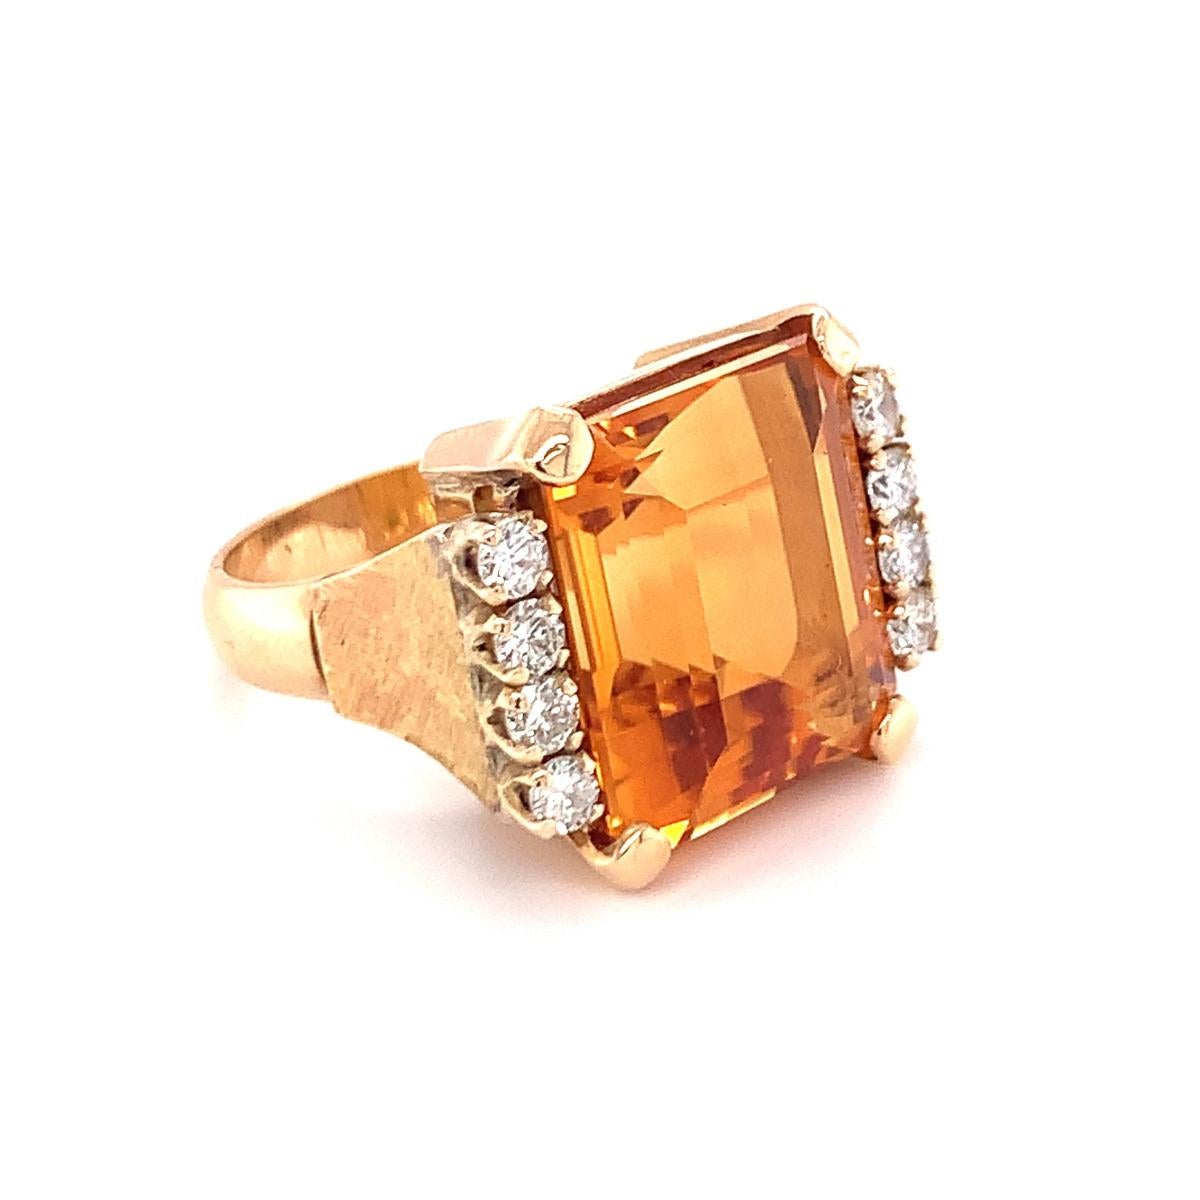 Citrine and Diamond Ring in 18K Yellow Gold, circa 1960s For Sale 4